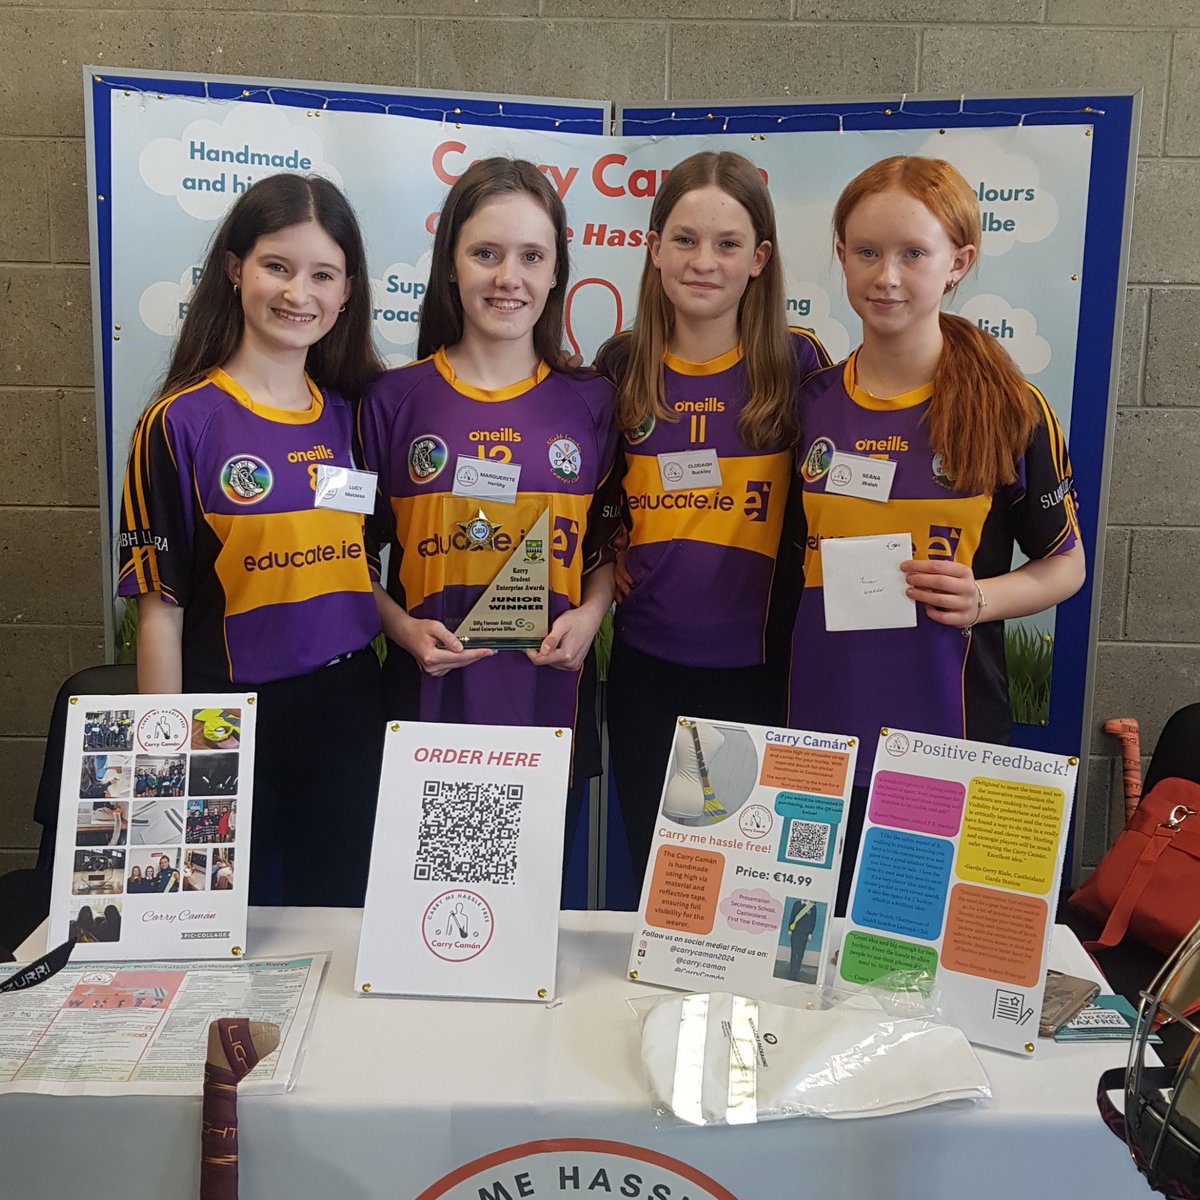 Meet the Kingdom's Junior Category winners - Carry Camán from Presentation Secondary School, Castleisland. They have created a High visibility hurley and sliotar holder.

#TeamKerry #StudentEnterprise